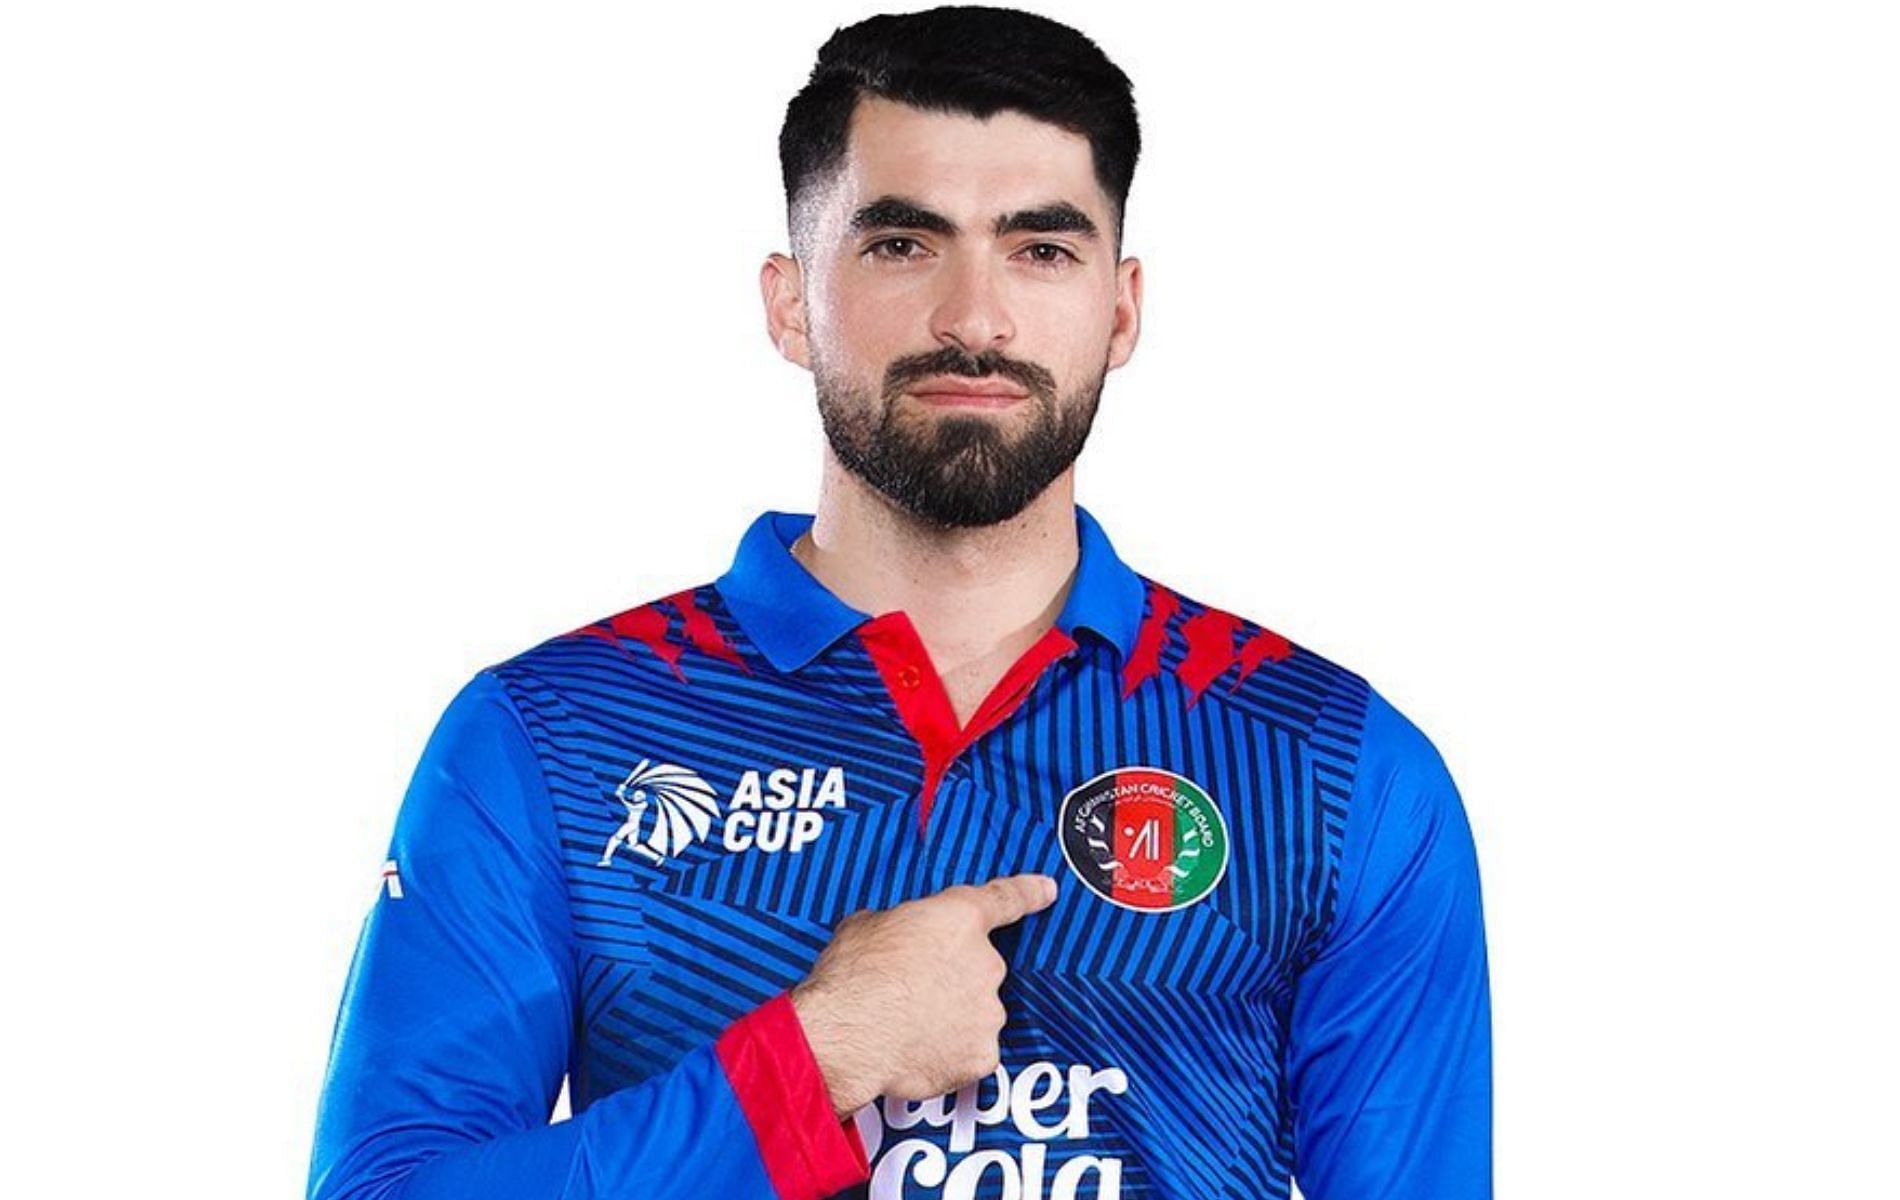 With 376 runs from 9 outings, Ibrahim Zadran was Afghanistan